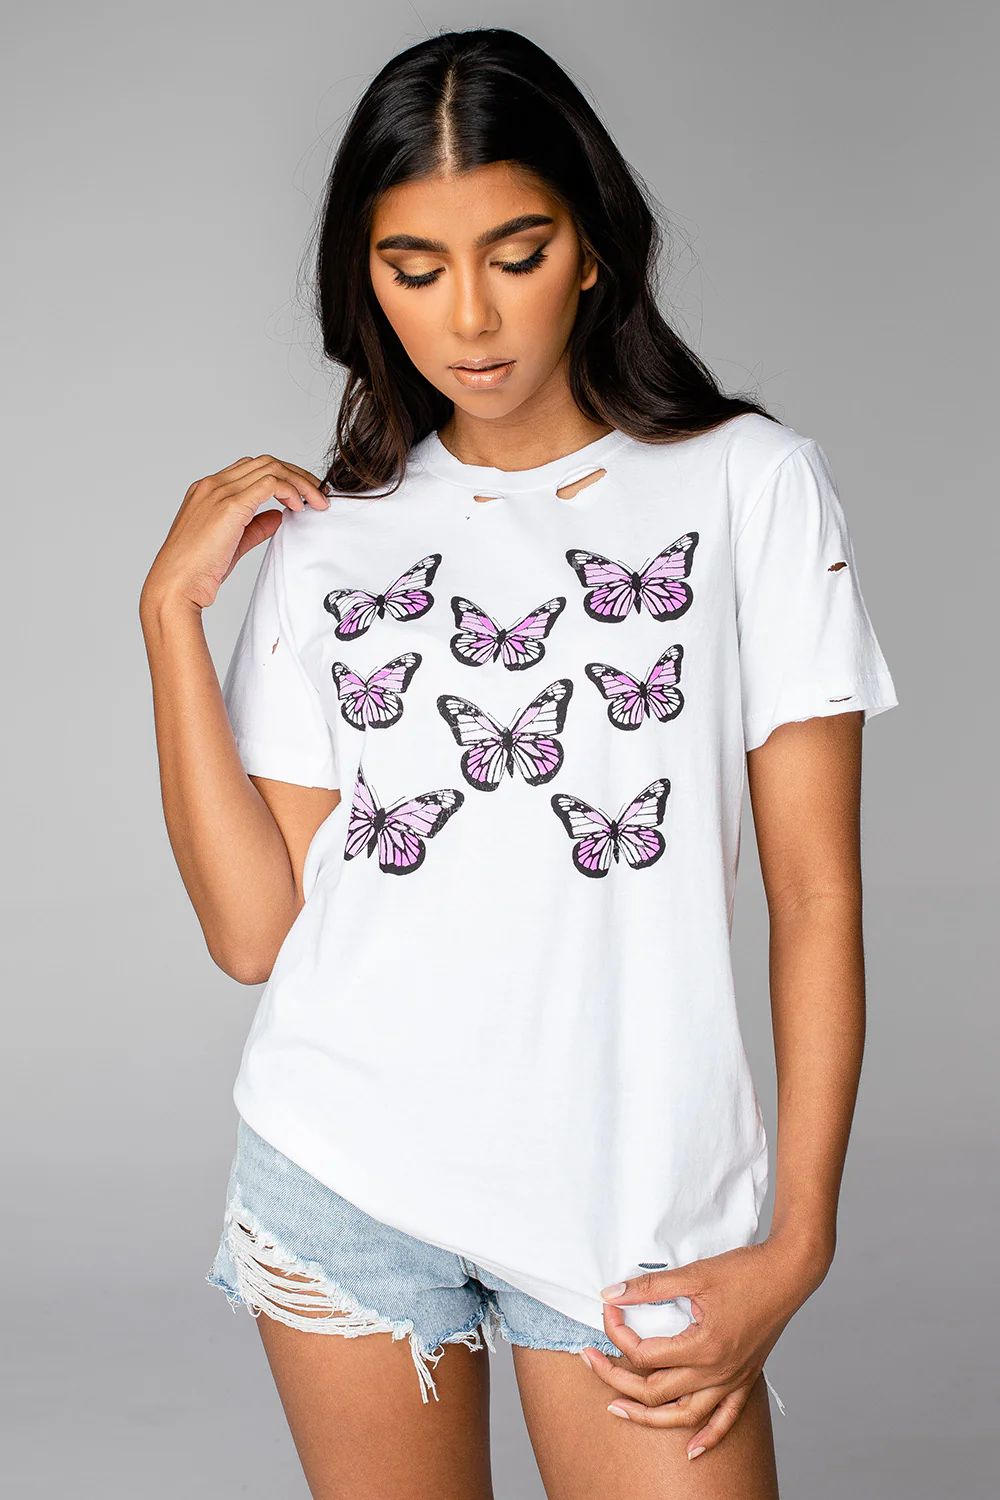 Cam Distressed Graphic Tee - Butterflies | BuddyLove